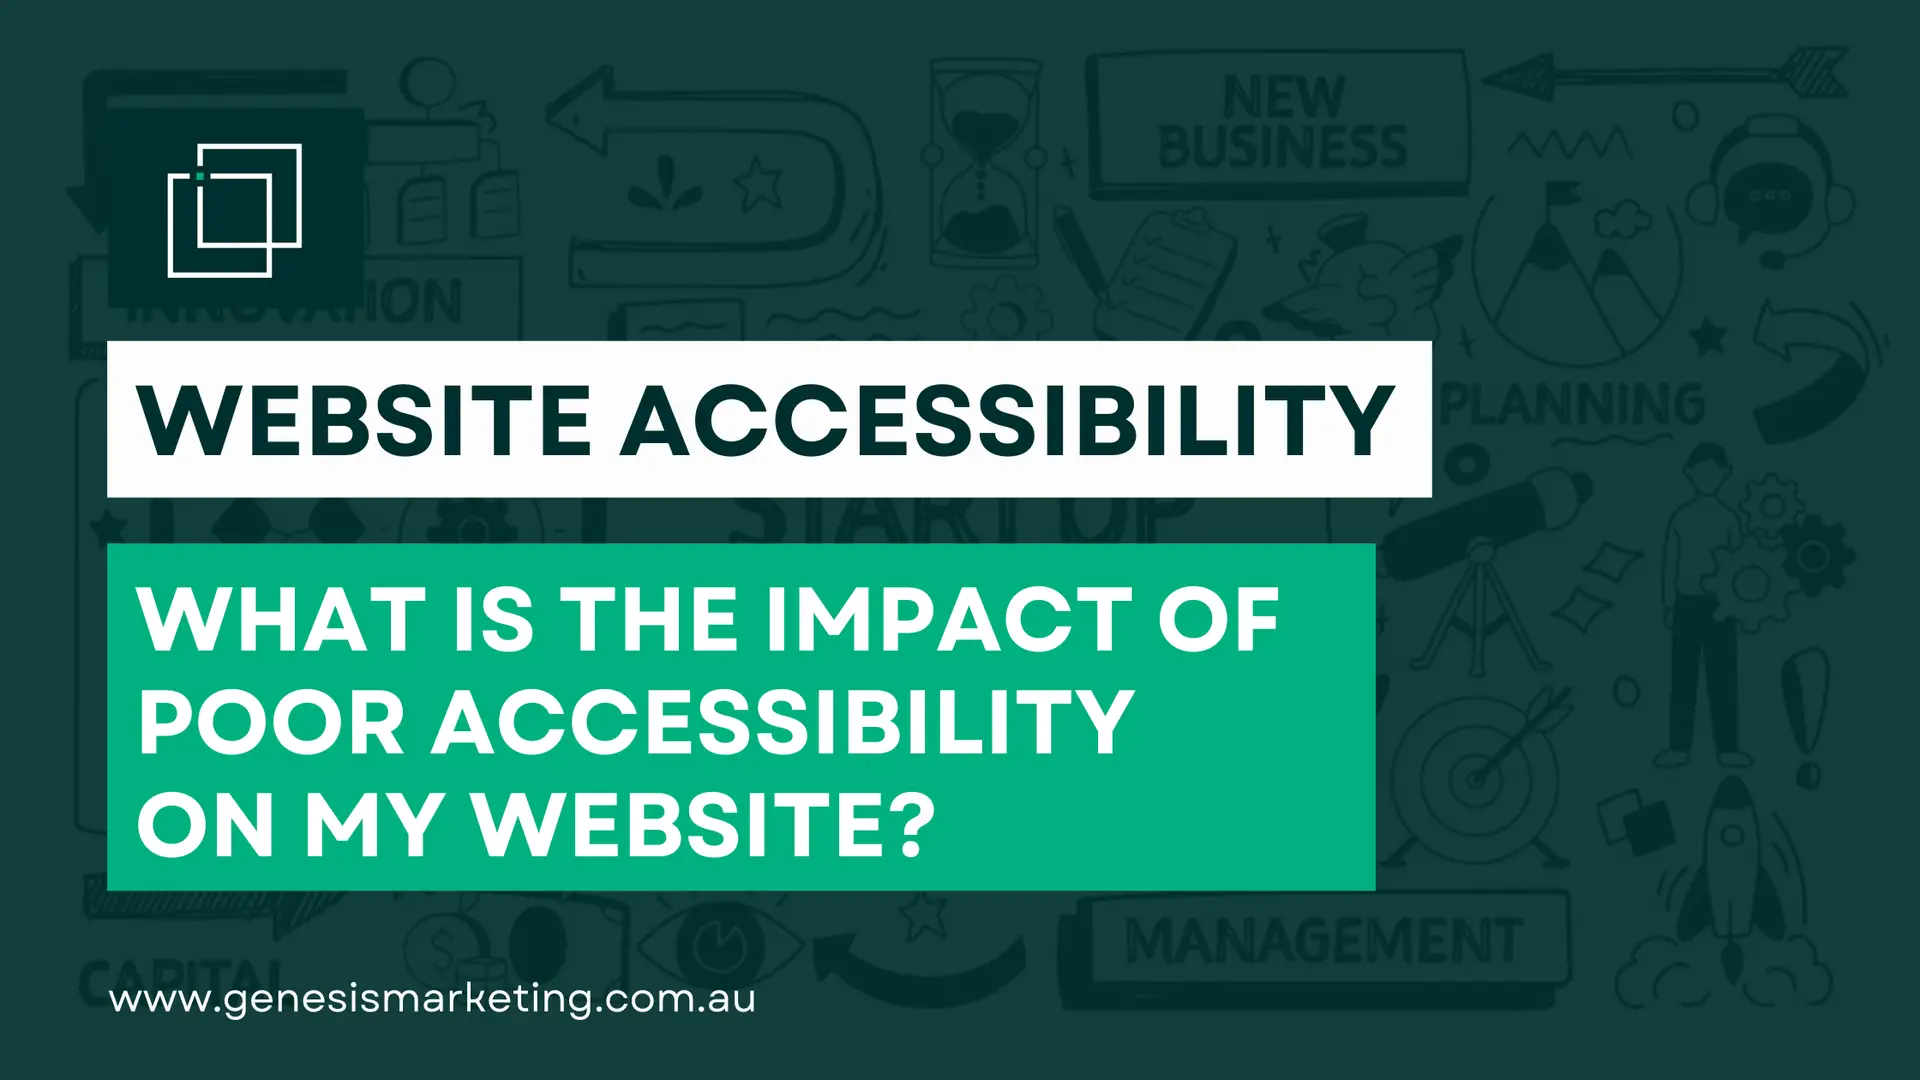 What is the Impact of Poor Accessibility on my Website